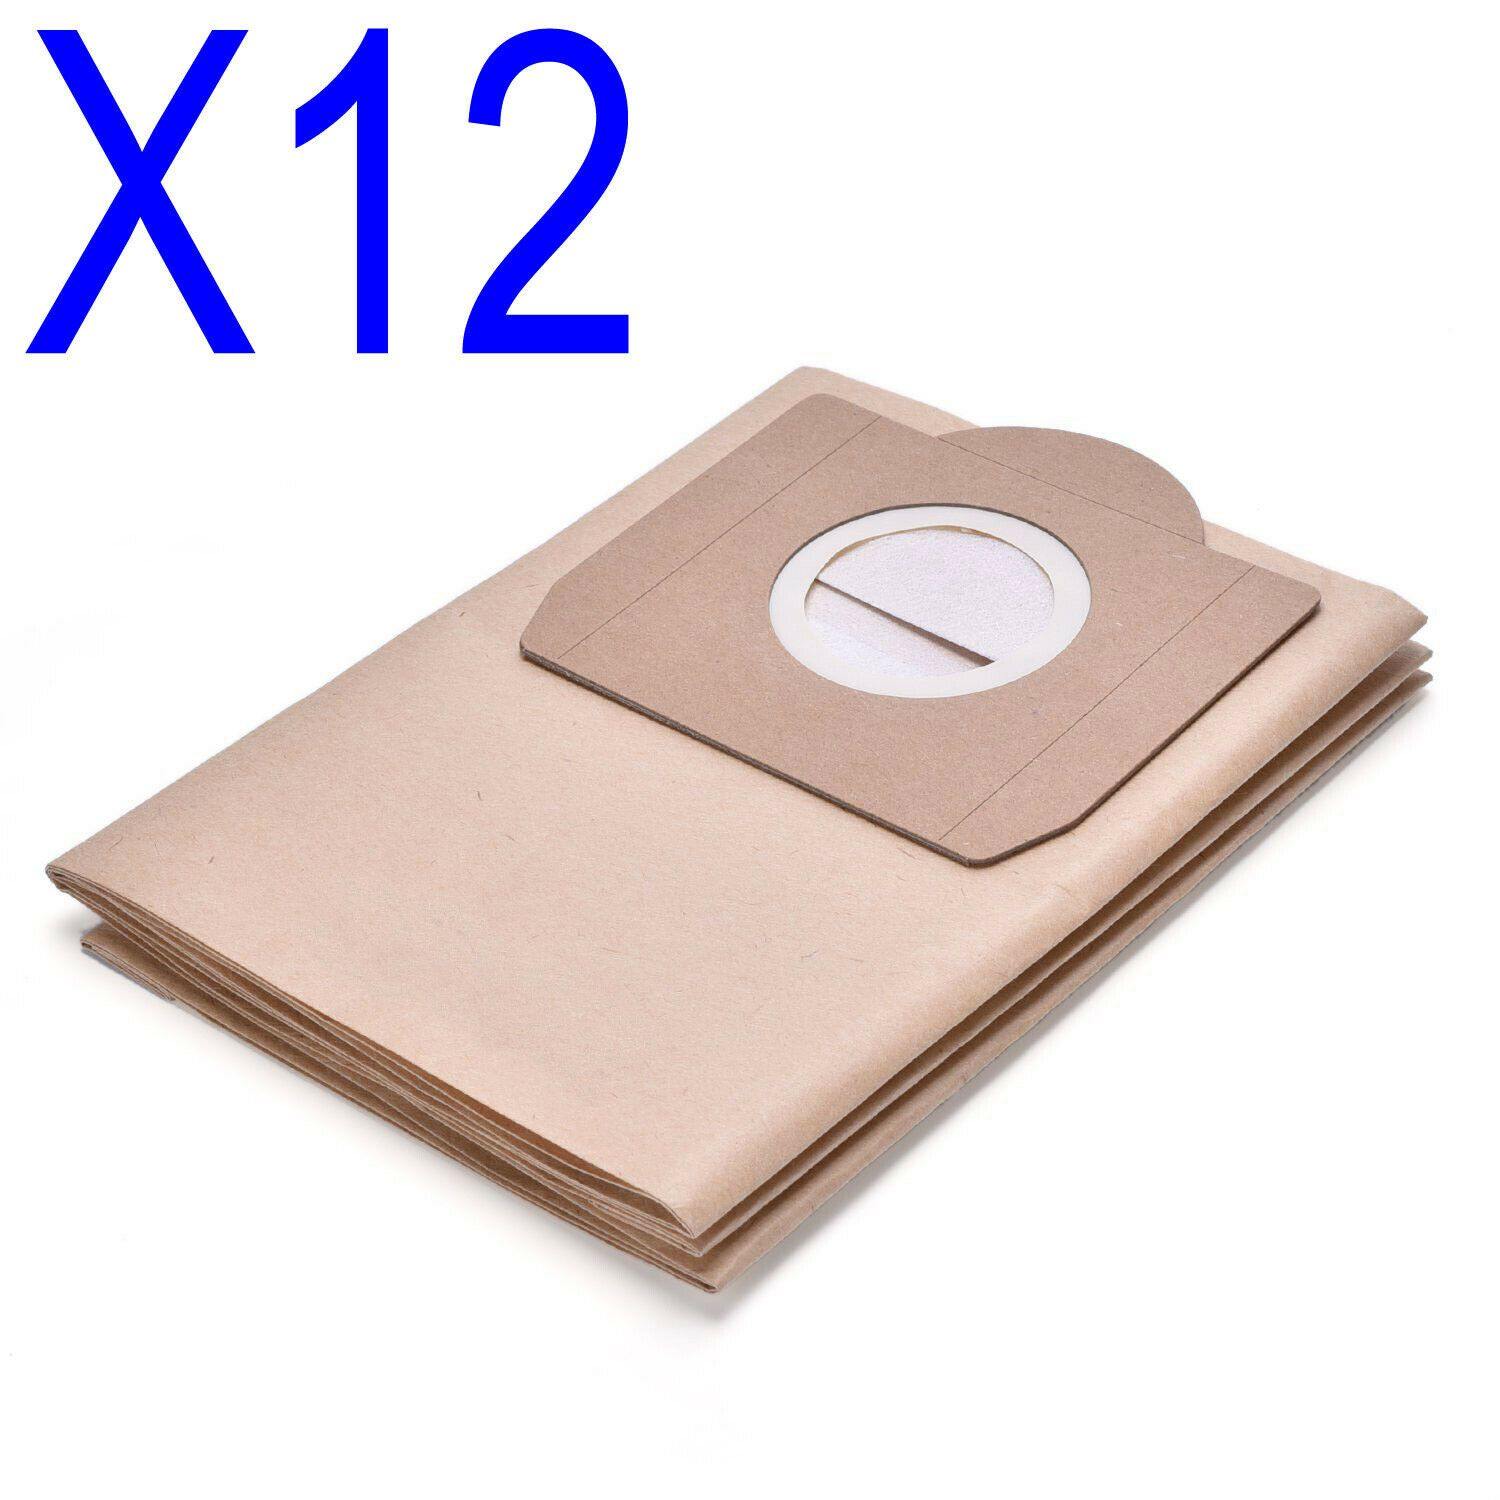 12x Paper Dust Bags for Karcher 6.959-130.0 Wet & Dry Vacuum Cleaner 69591300 Sparesbarn